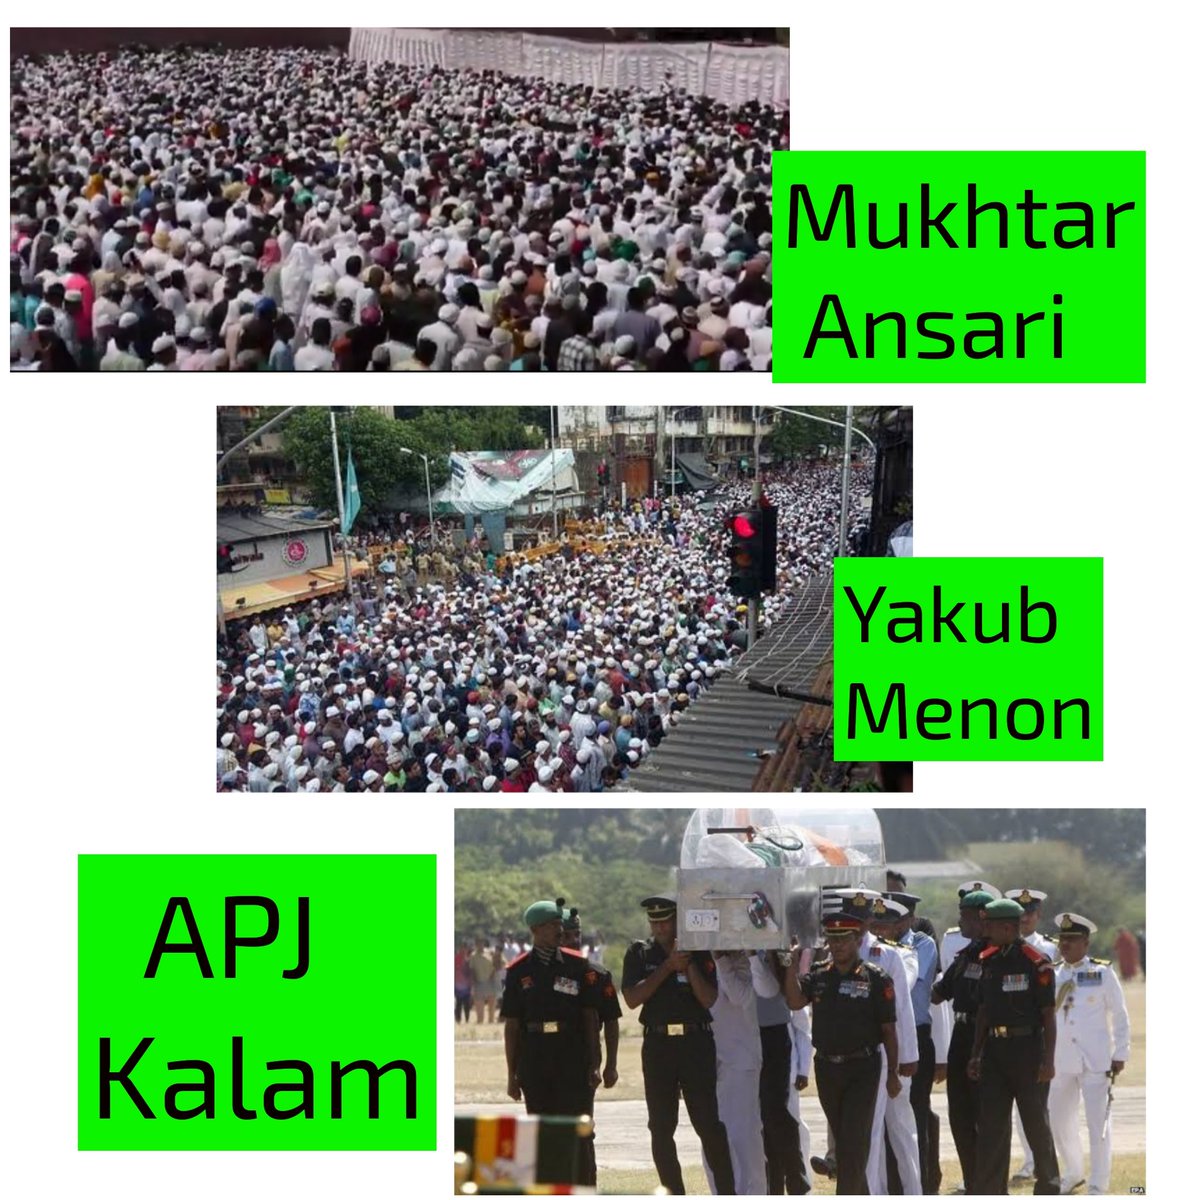 -Funeral of terr0rist Mukhtar Ansari : Over 1 lakh MusIims participated -Funeral of terr0rist Yakub Menon: Over 3 lakh MuIims participated -Funeral of APJ Abdul Kalam : Not even 300 MusIims participated All 3 were MusIims & yet this difference, says a lot. Doesn't it prove…